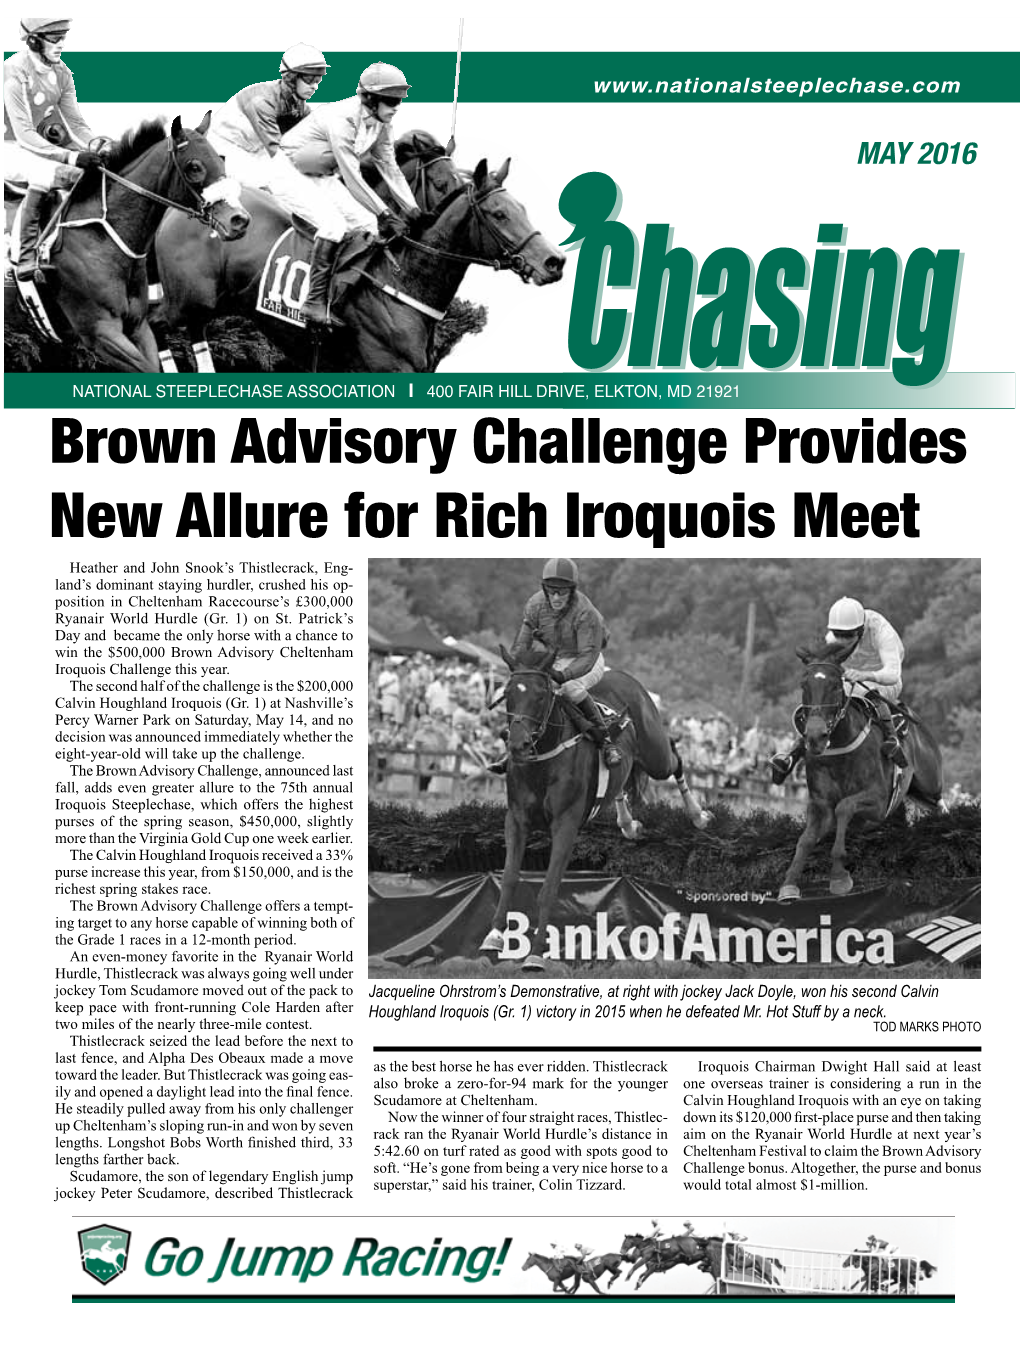 Brown Advisory Challenge Provides New Allure for Rich Iroquois Meet